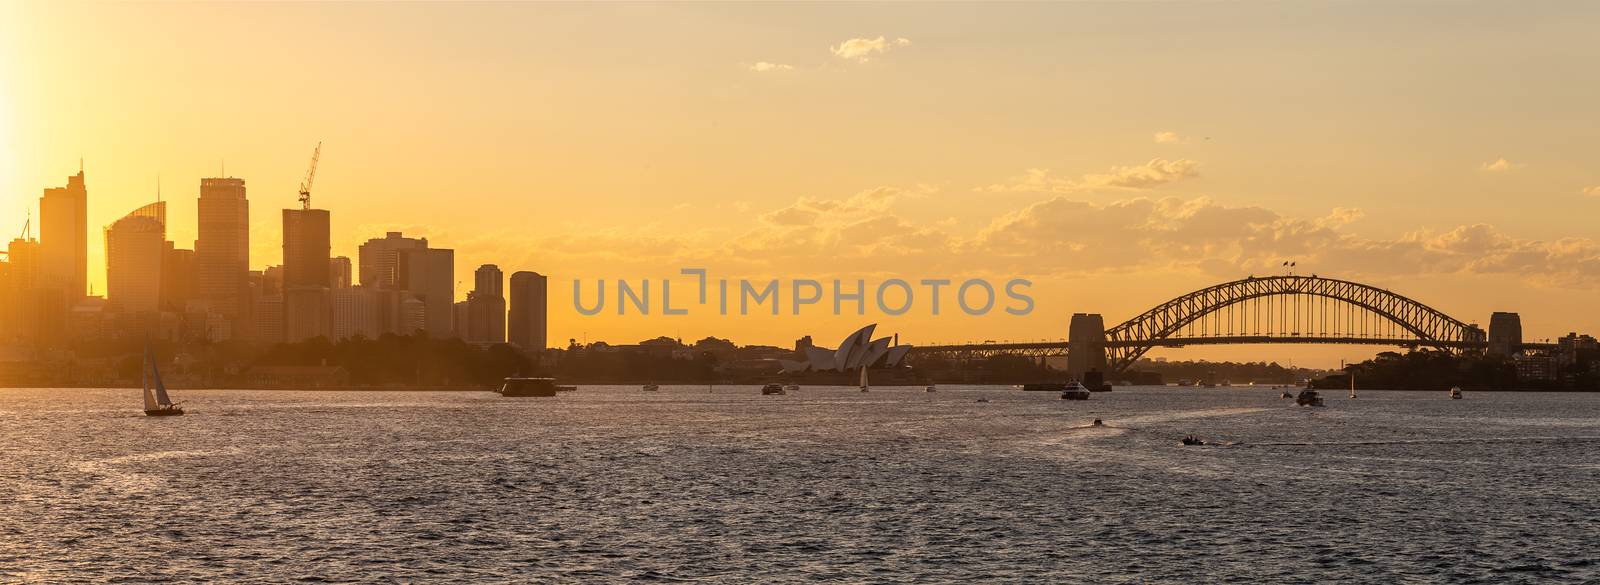 Panoramic view of Sydney downtown, harbor bridge and opera house with boats sailing in the bay at sunset. Beautiful orange sky.